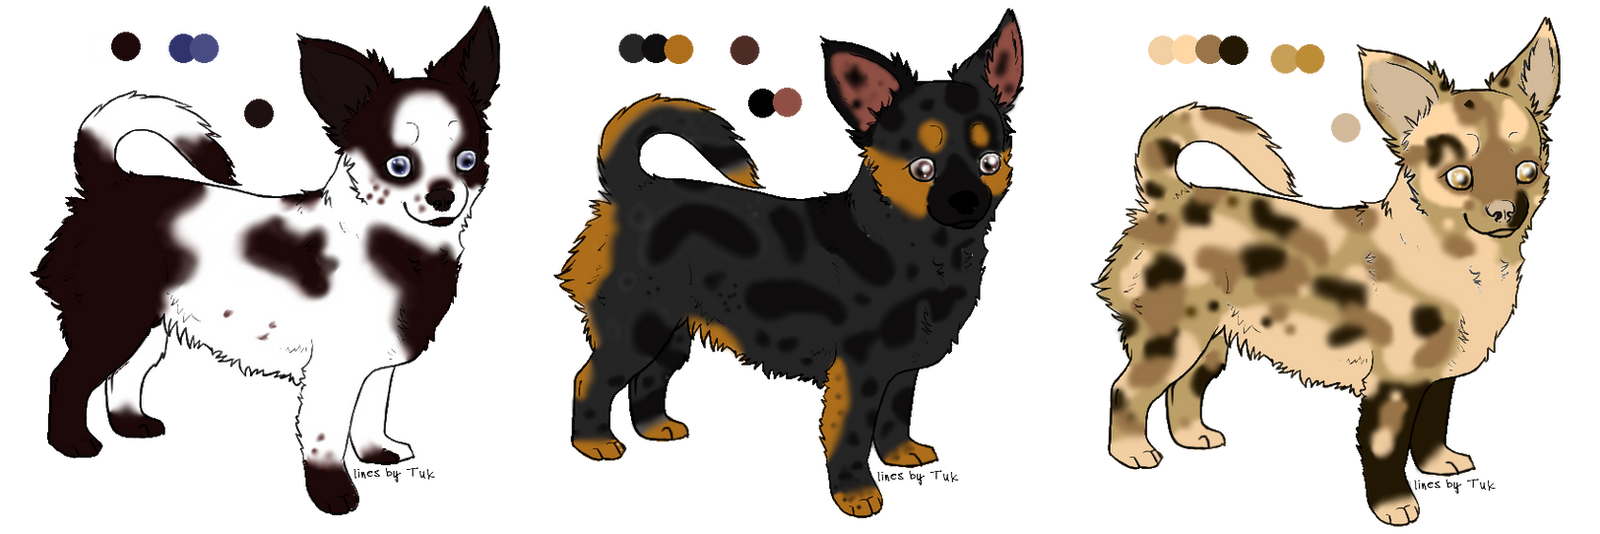 Chihuahua Designs for Darkwood-Hills